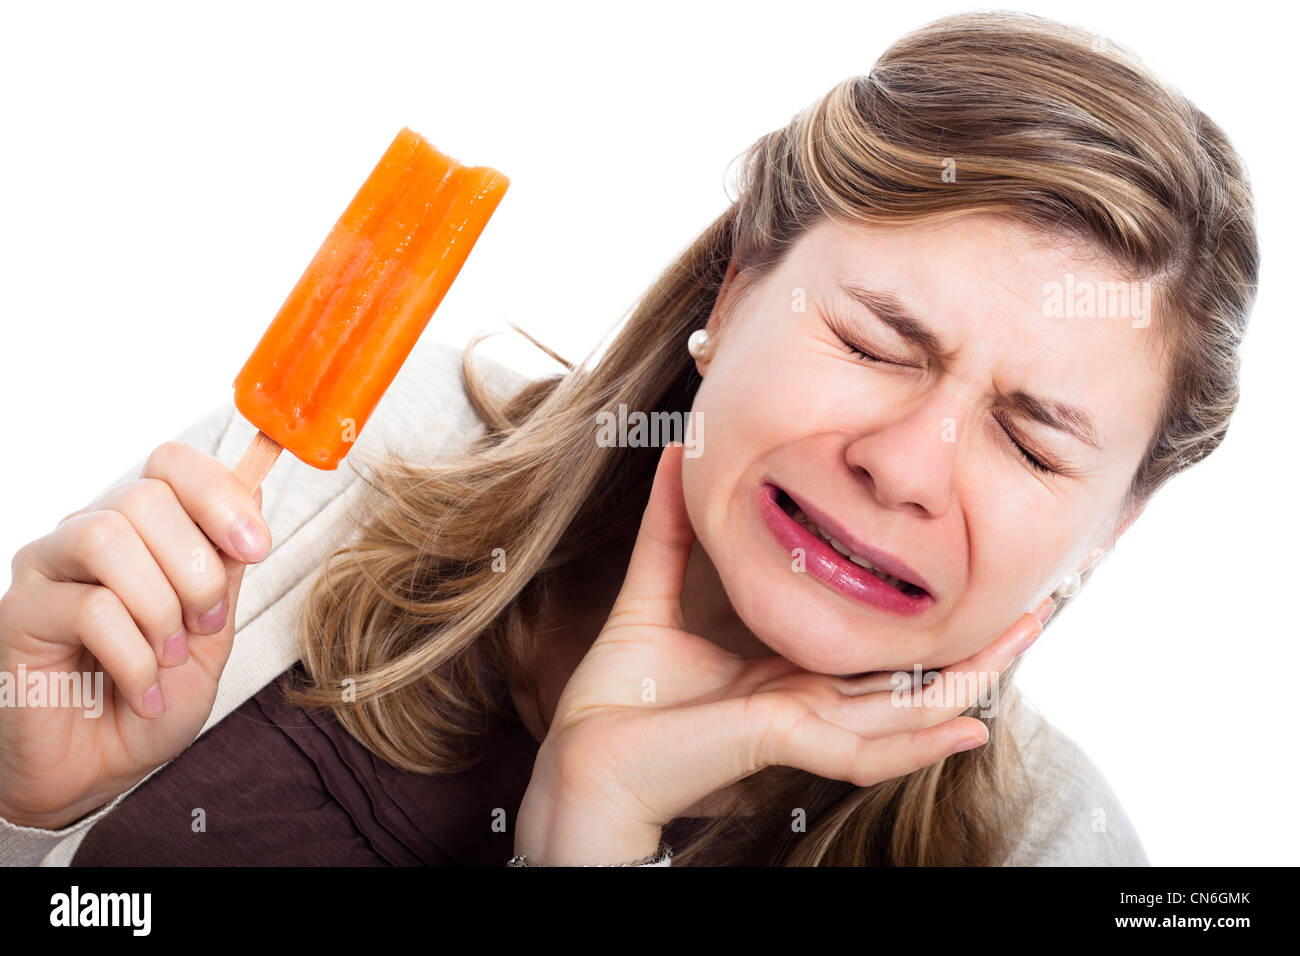 Young woman with hypersensitive teeth eating ice lolly, isolated on white background. Stock Photo